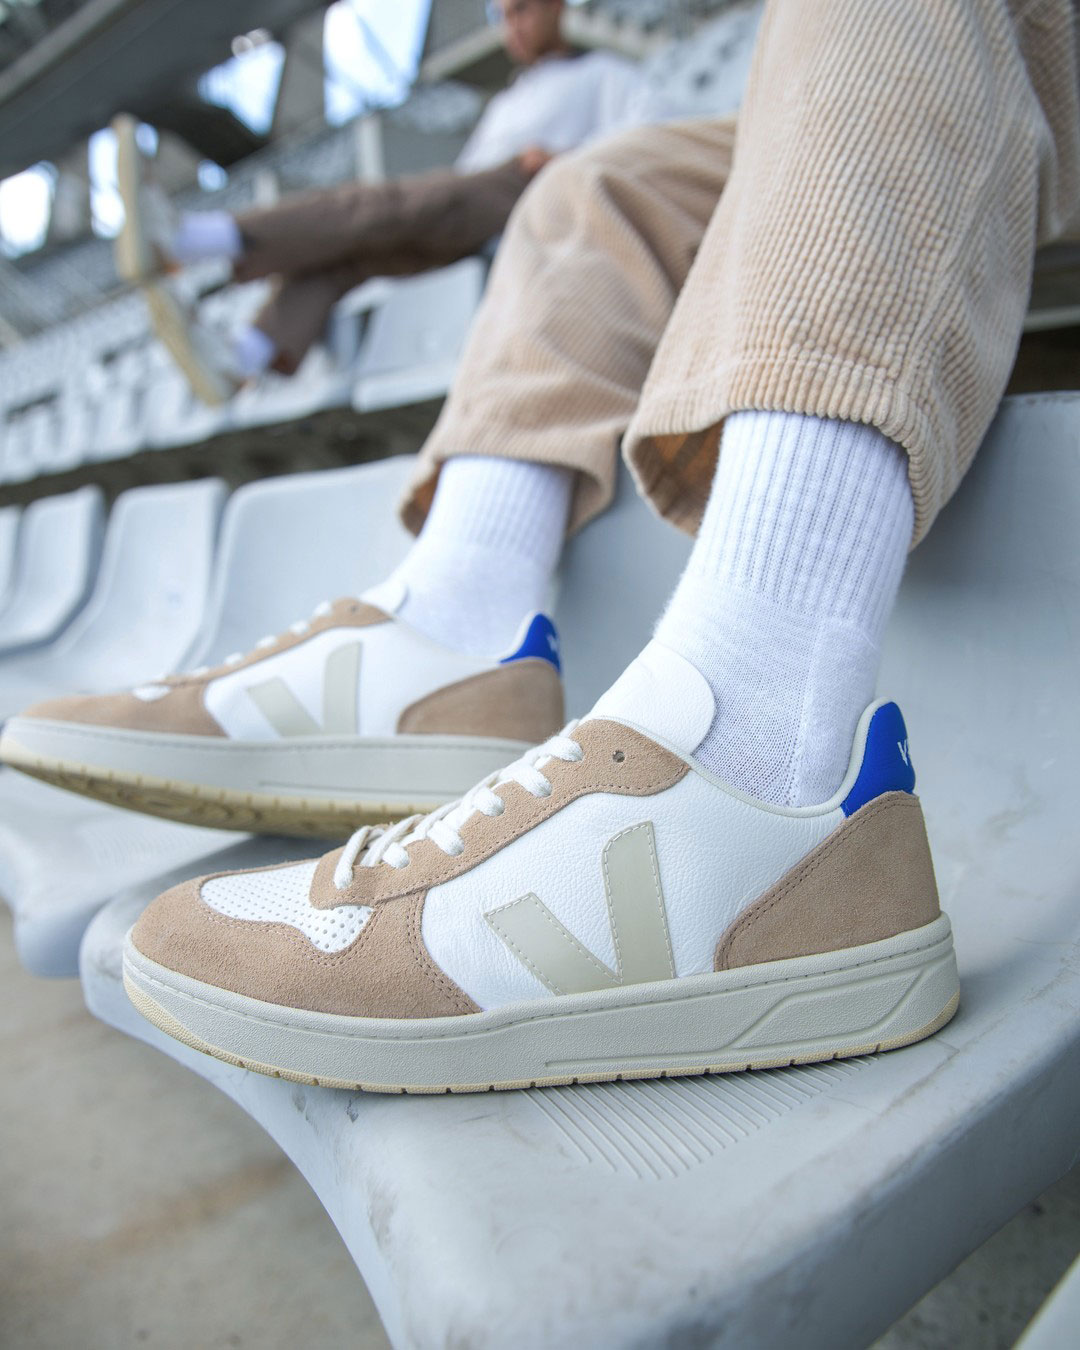 Beige and white Veja sneakers worn with long white socks and beige corduroy pants.